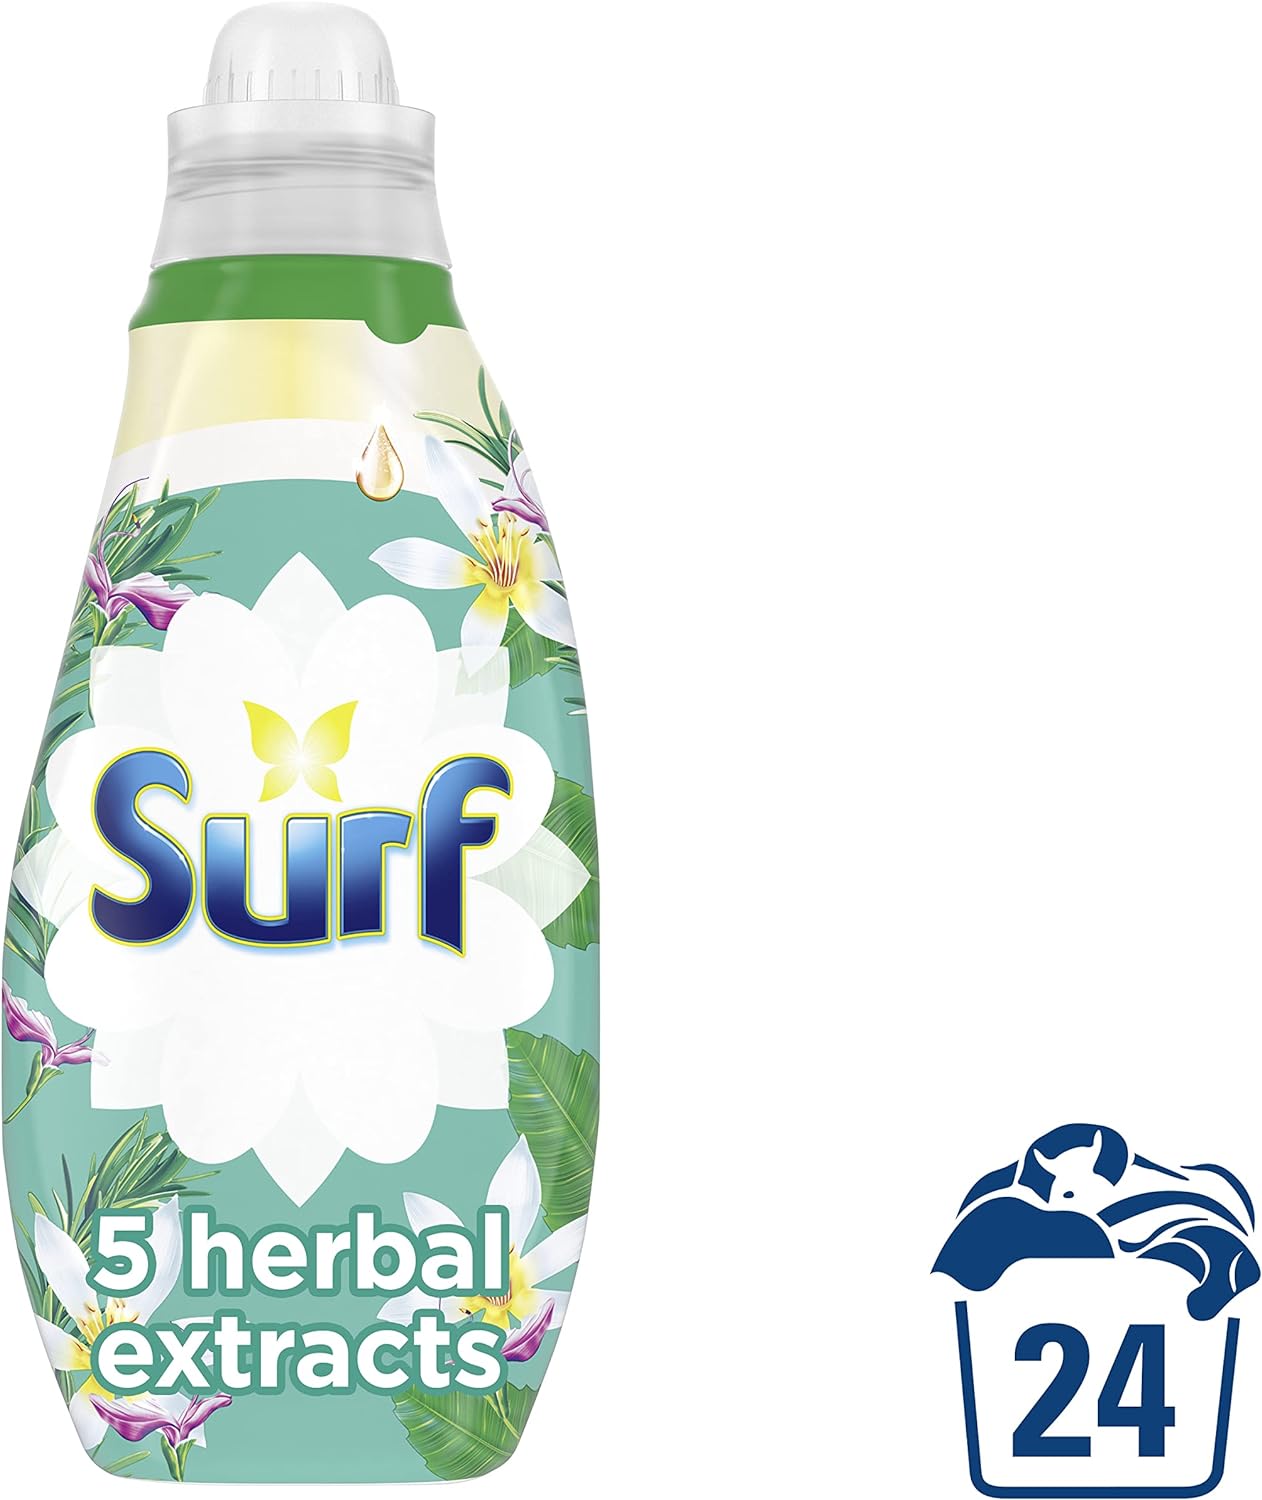 7x Surf 5 Herbal Extracts infused with natural essential oils Concentrated Liquid Laundry Detergent (qty 7)- 9812